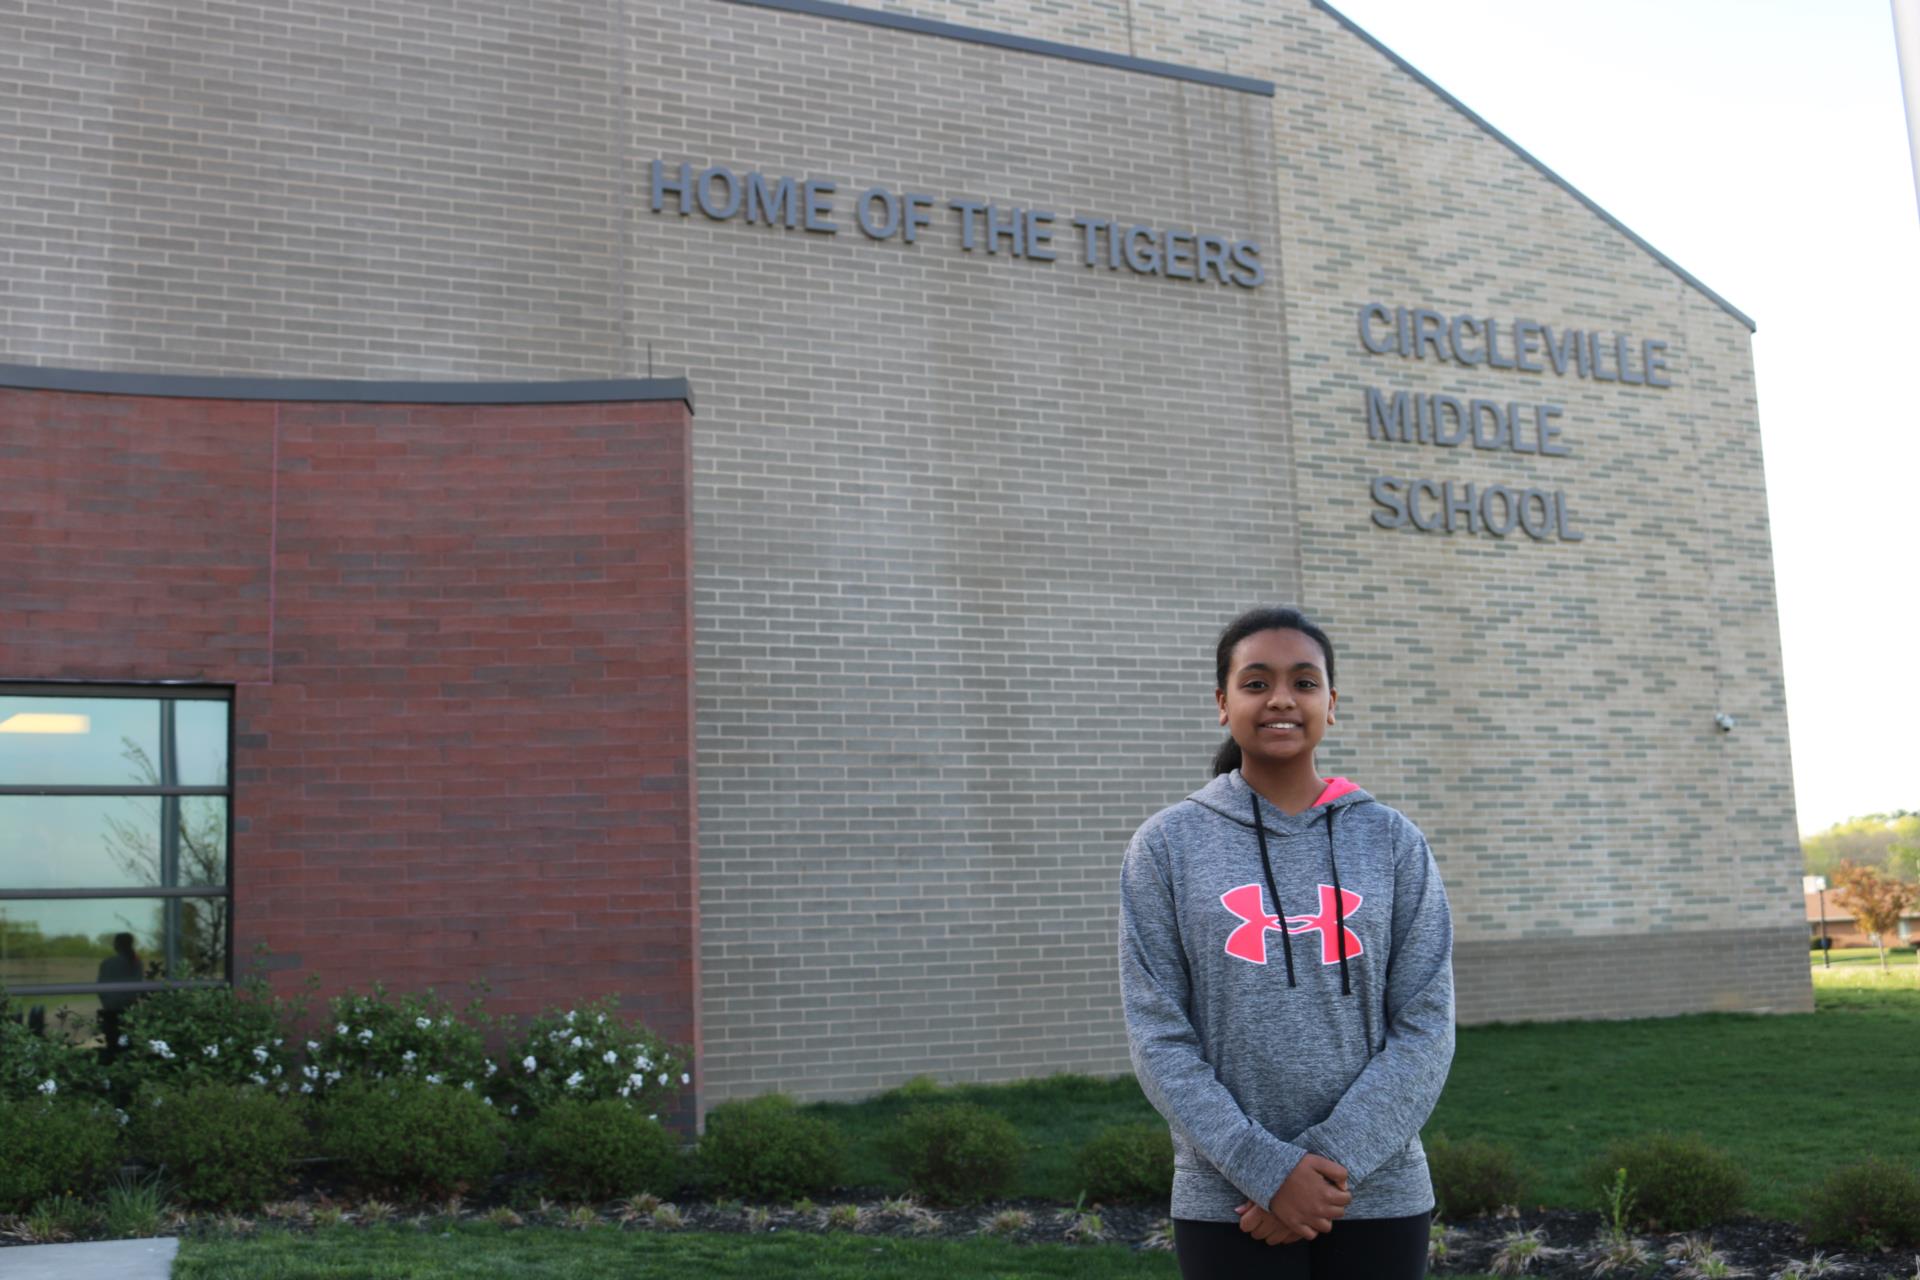 Sixth grade student Addisyn Ndayitwayeko has been named a finalist in the 2019 Central Ohio Better Business Bureau’s (BBB) “Laws of Life Essay Contest.”